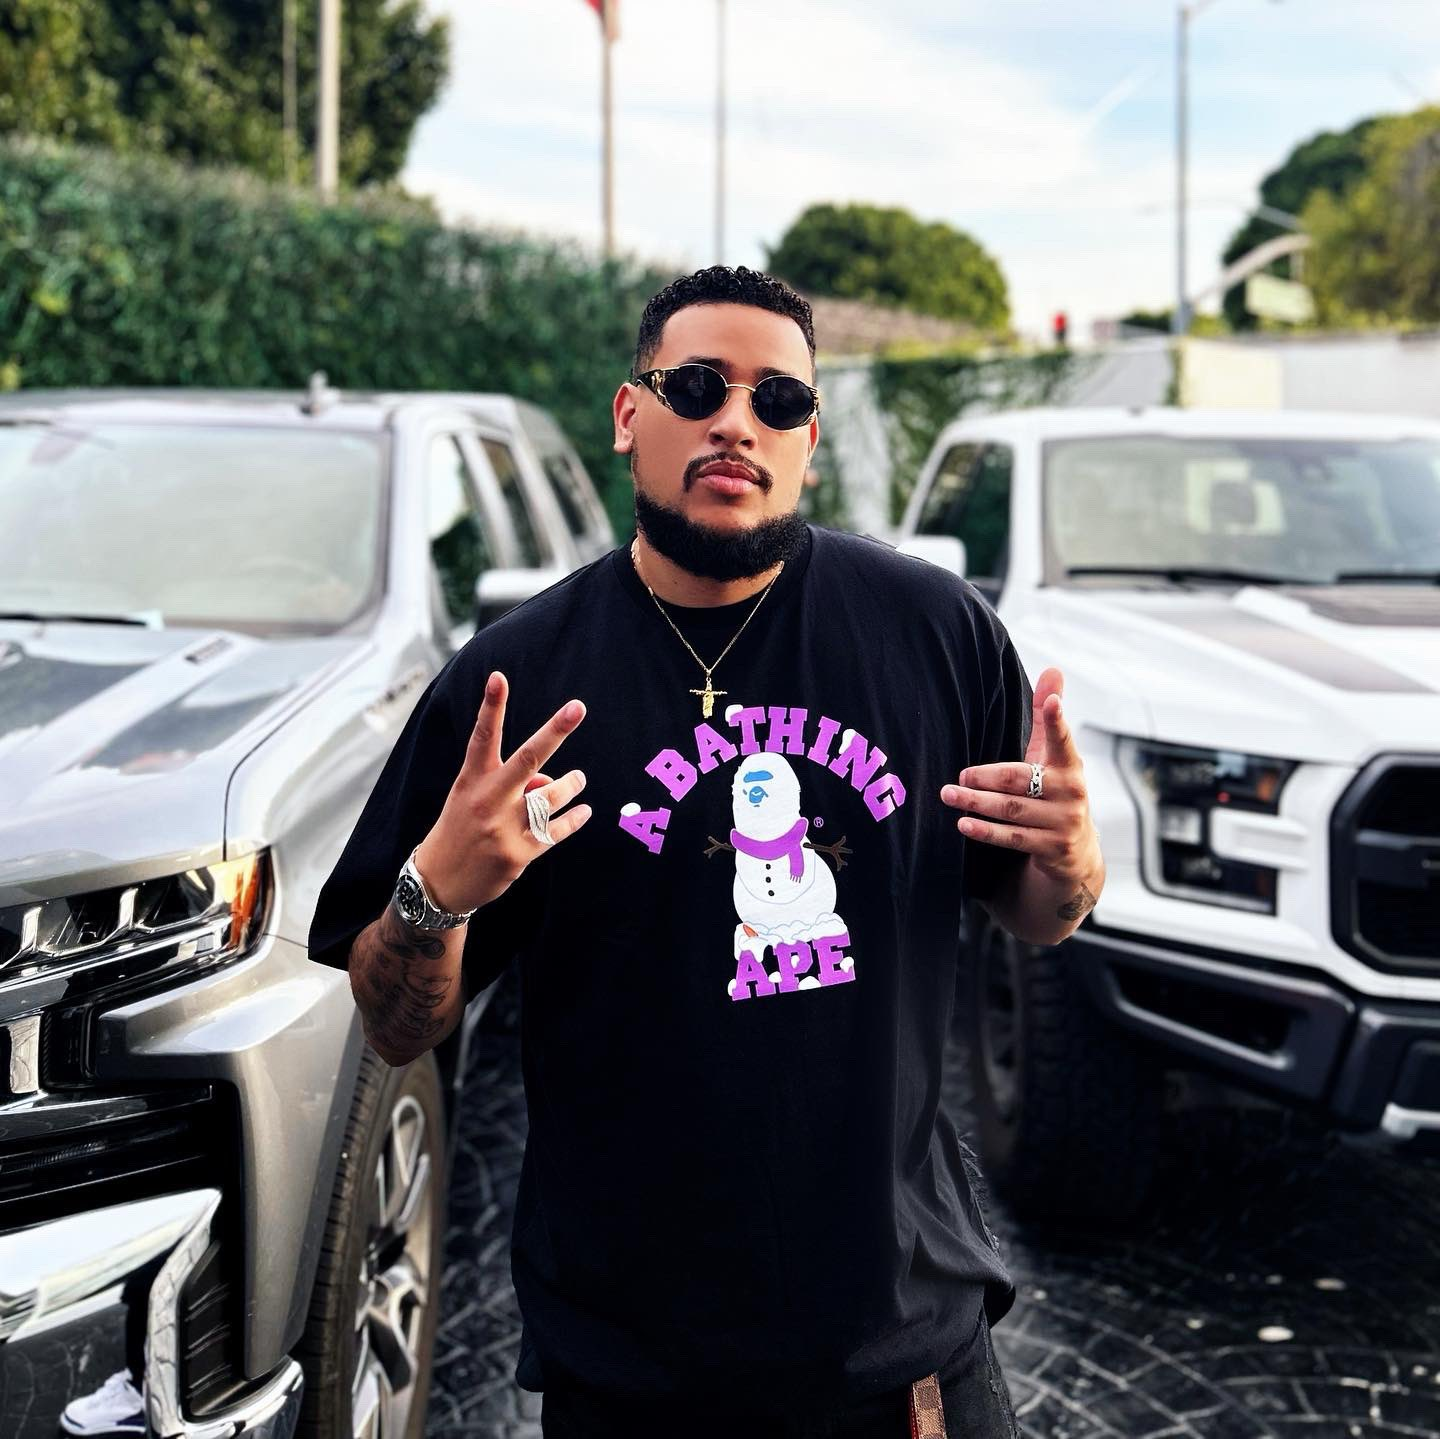 https://www.gistcent.com.ng/2023/02/pictures-of-aka-south-african-rapper-that-was-shot-dead.html